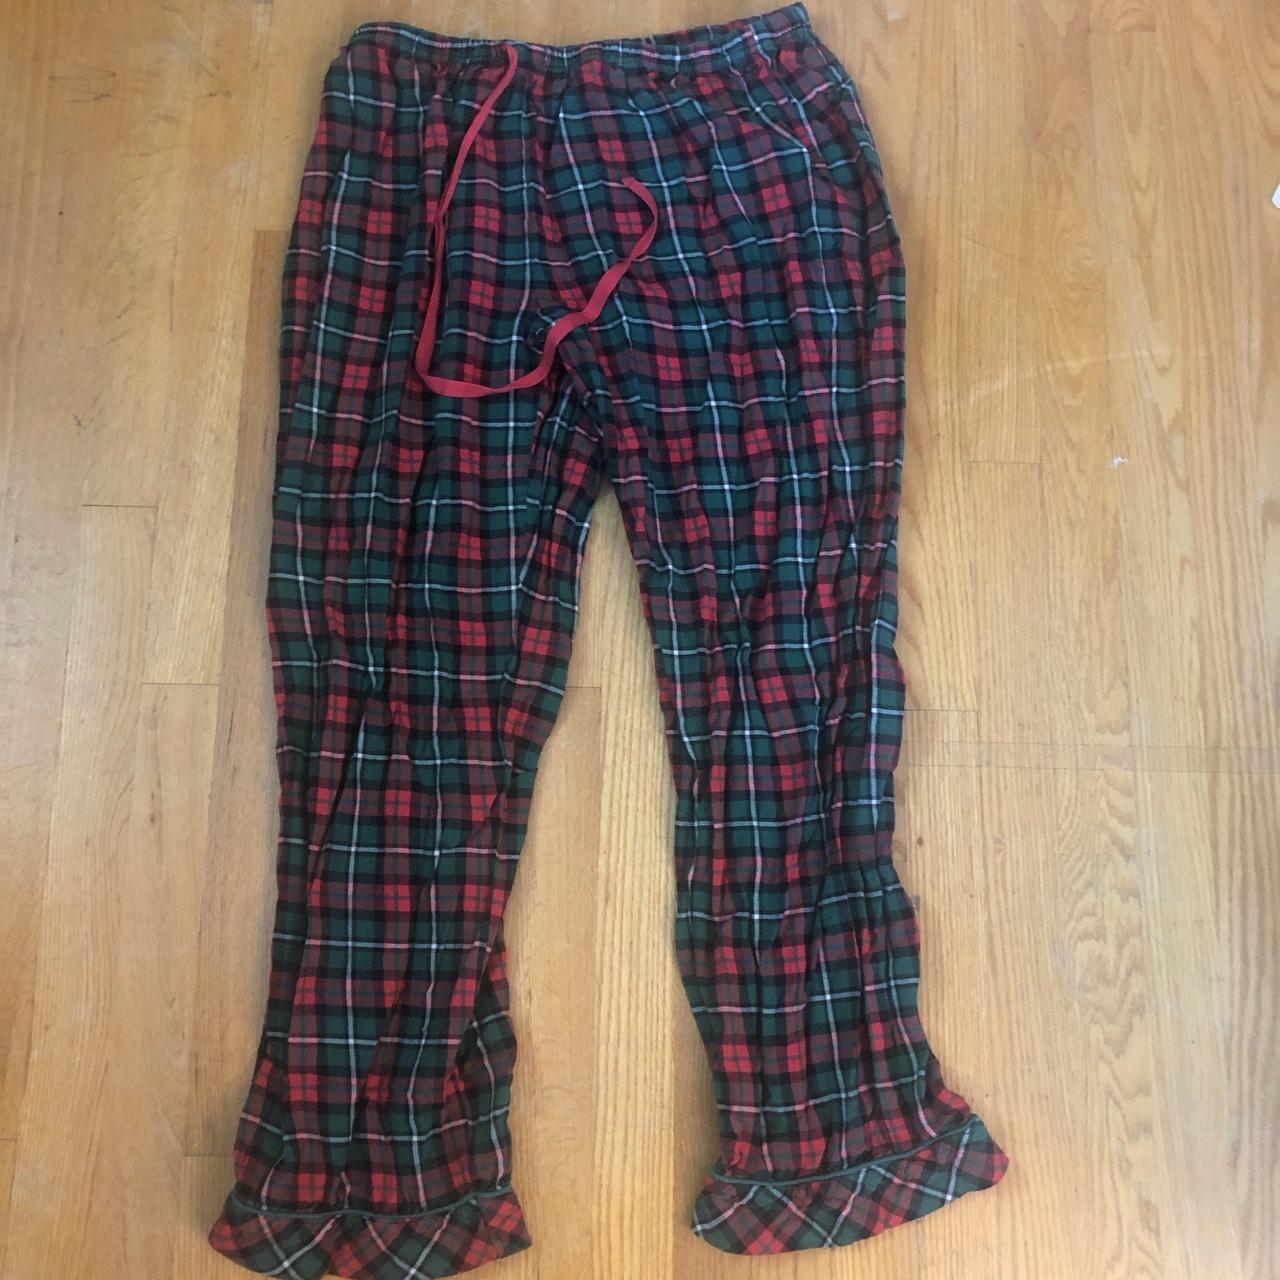 Product Image 1 - Plaid green and red pajama